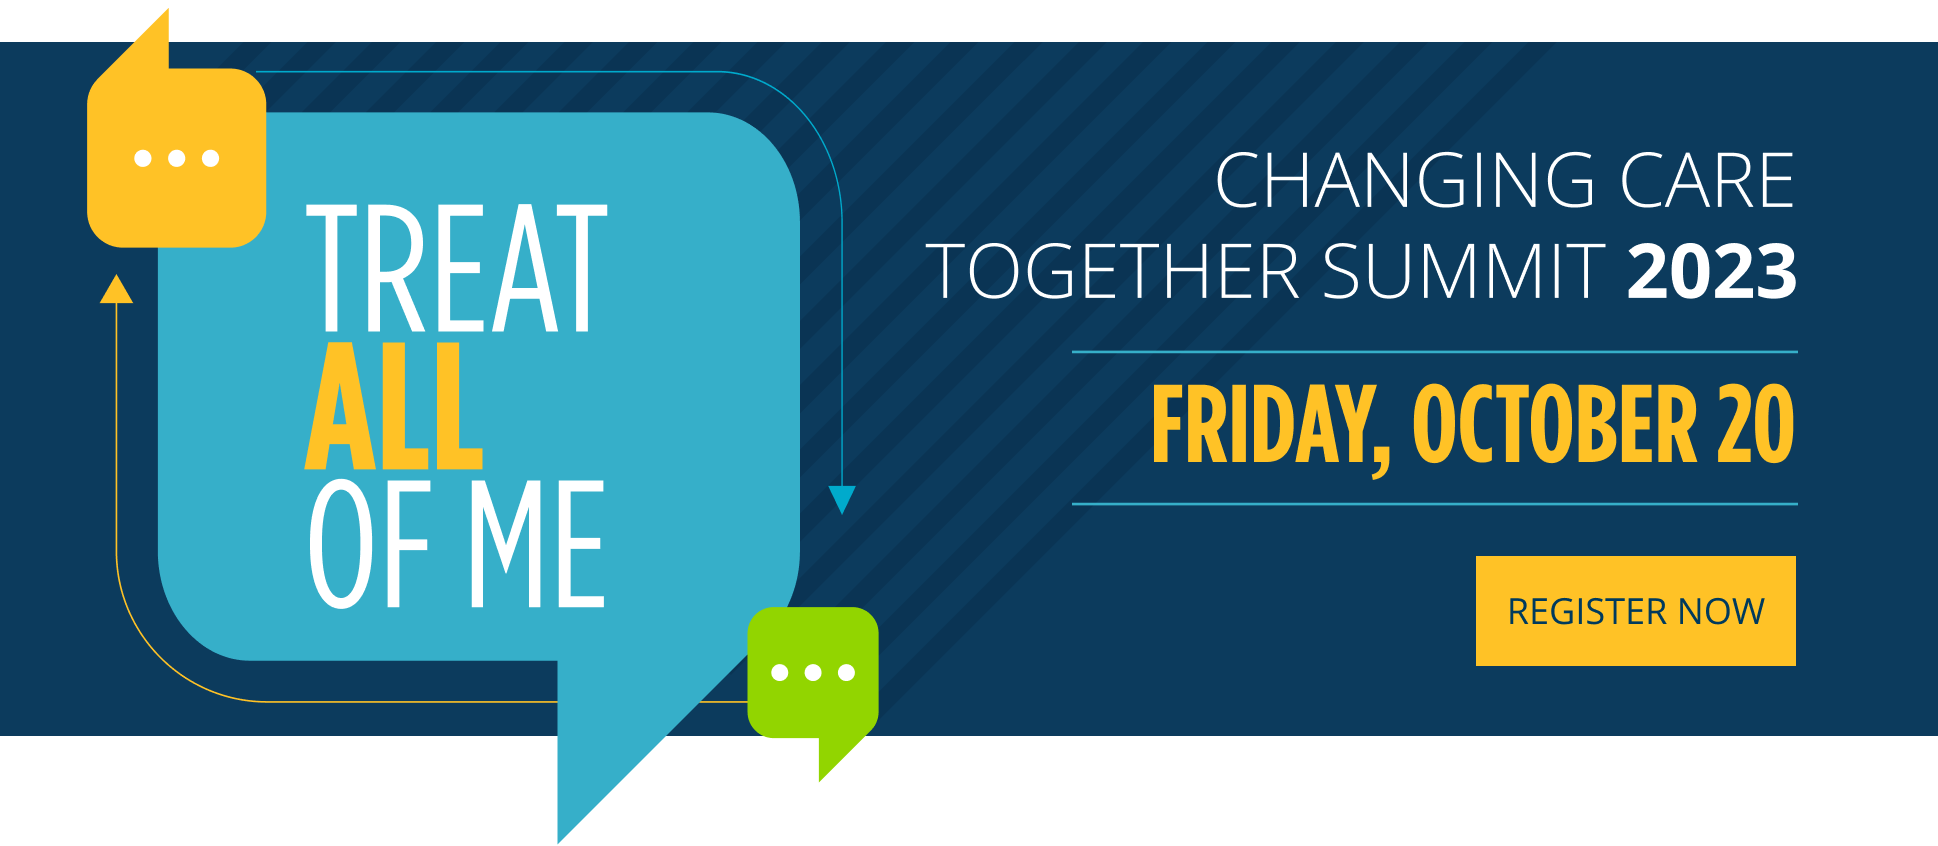 Changing Care Together Summit 2023